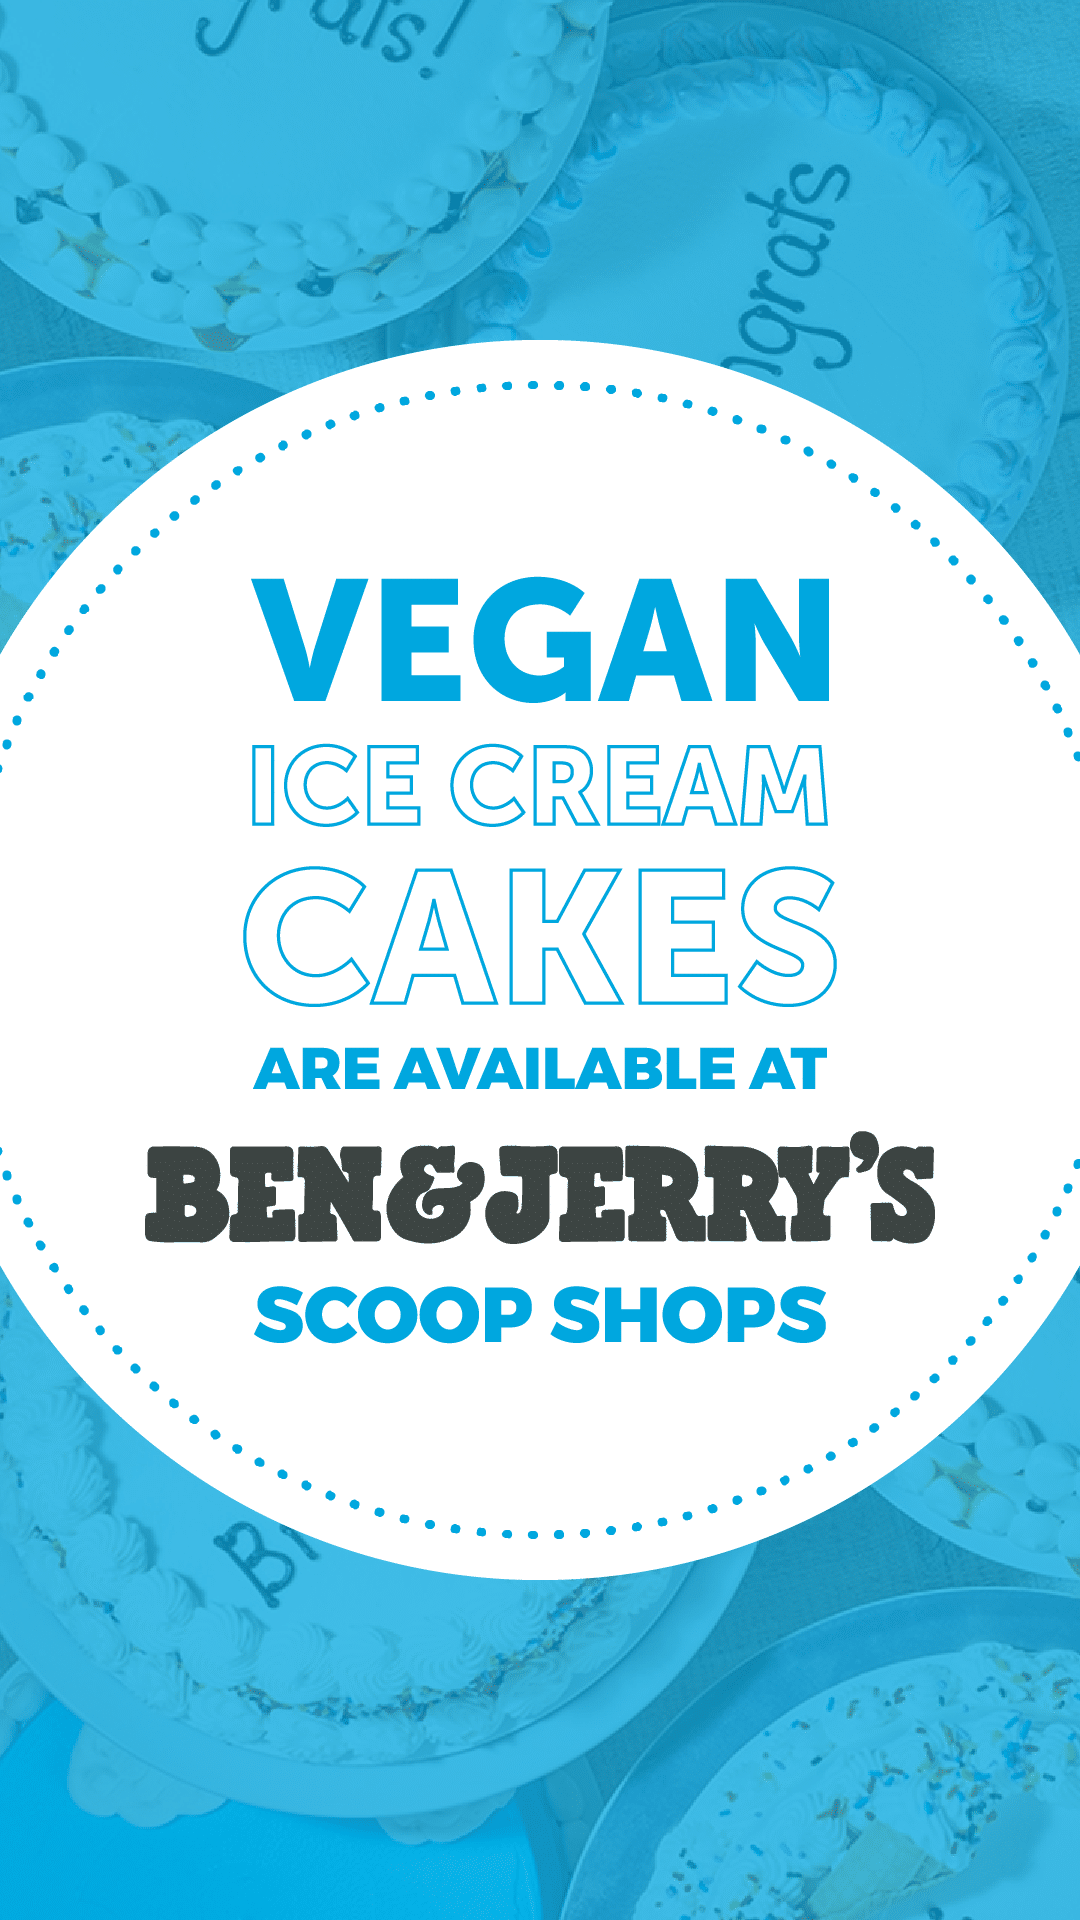 Vegan Ice Cream Cakes Are Available at Ben & Jerry’s Scoop Shops